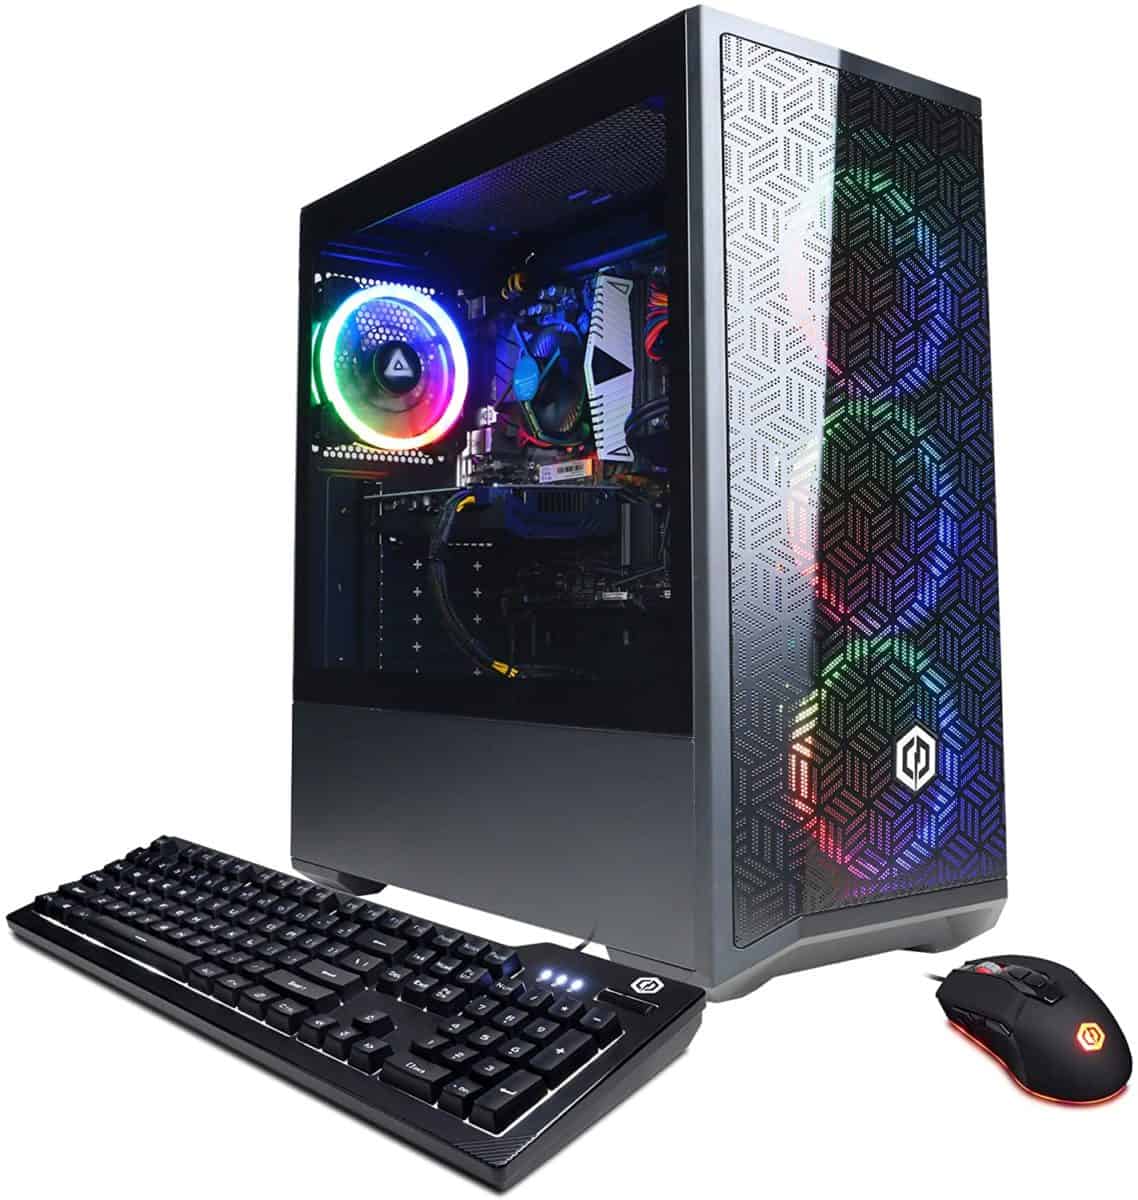 CYBERPOWERPC Gamer Xtreme VR Gaming PC Intel Core i5 11400F 2.6GHz 8GB DDR4 GeForce RTX 2060 6GB 500GB NVMe SSD WiFi Ready Win 11 Home GXiVR8060A11